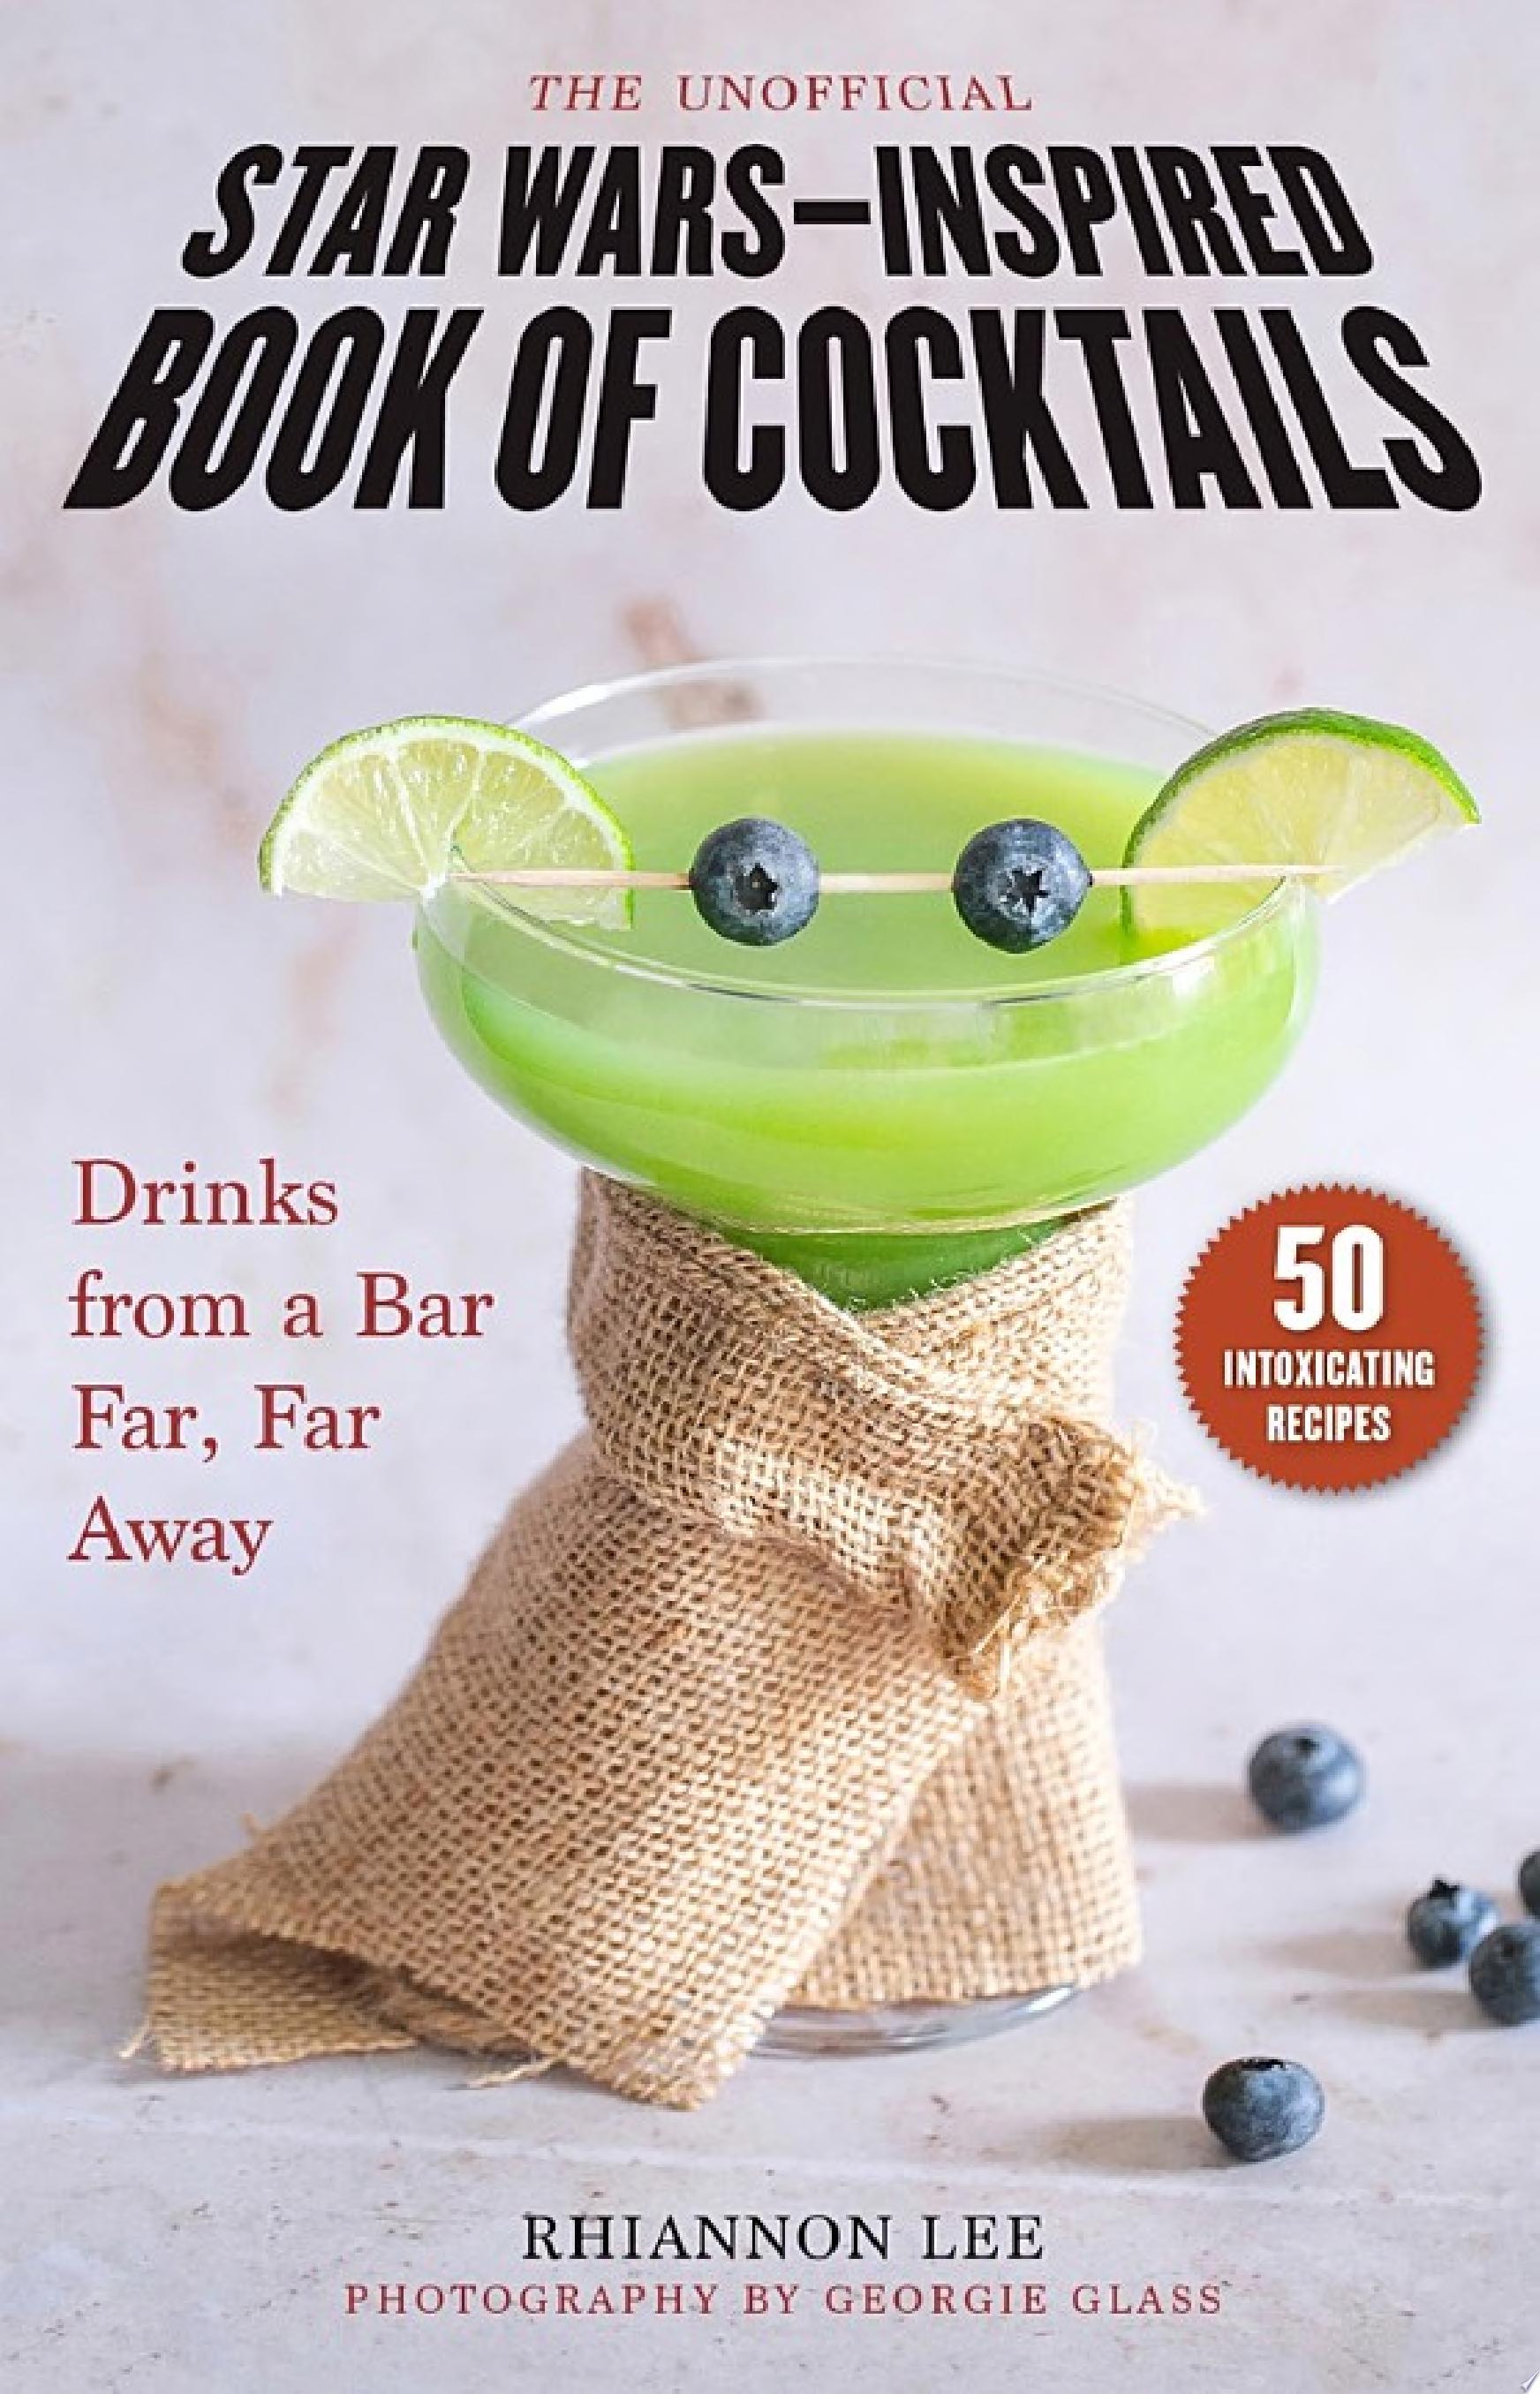 Image for "The Unofficial Star Wars–Inspired Book of Cocktails"